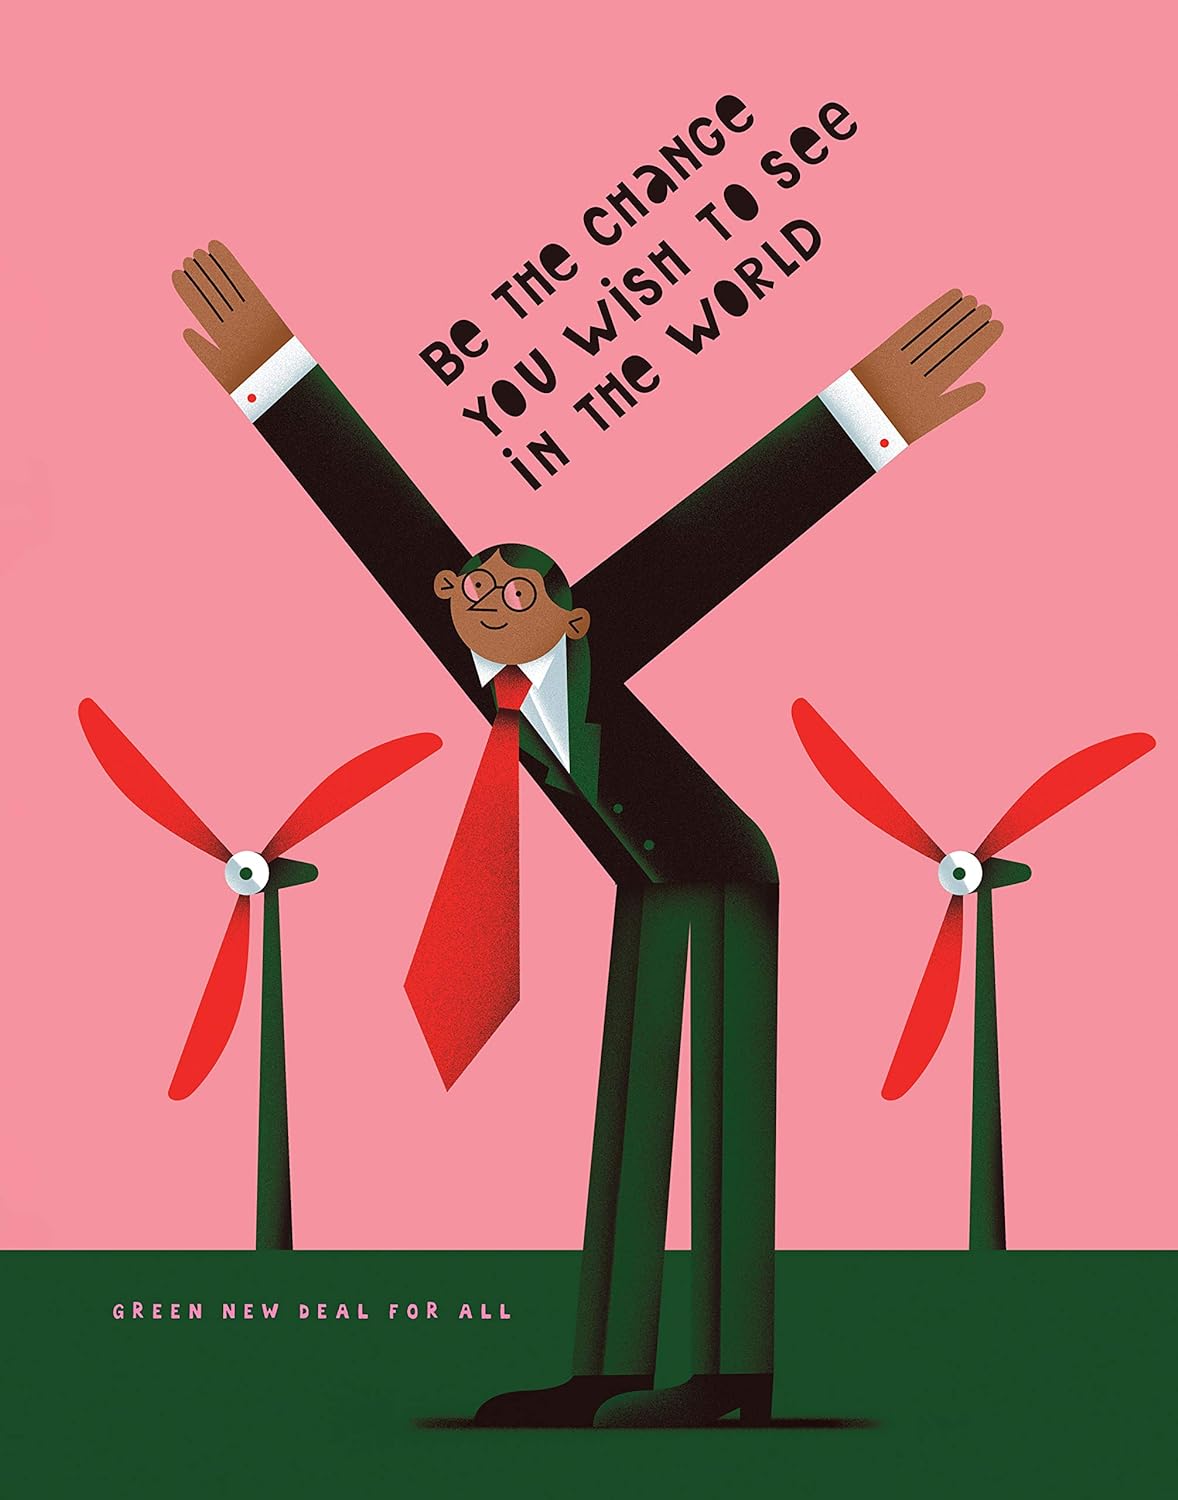 Posters for a Green New Deal